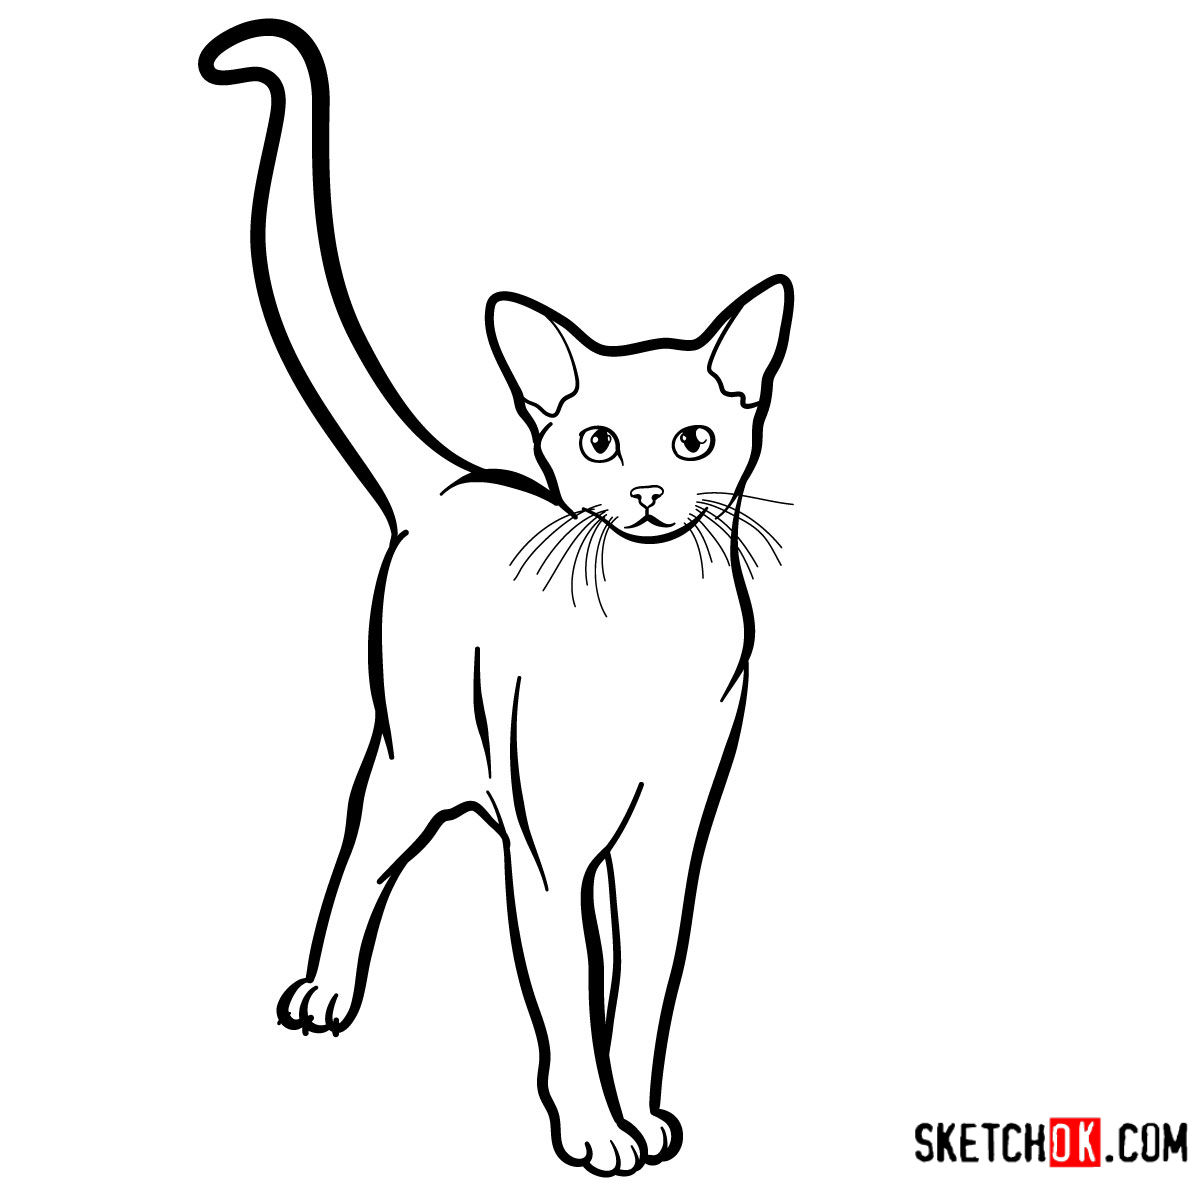 How to draw the Abyssinian cat